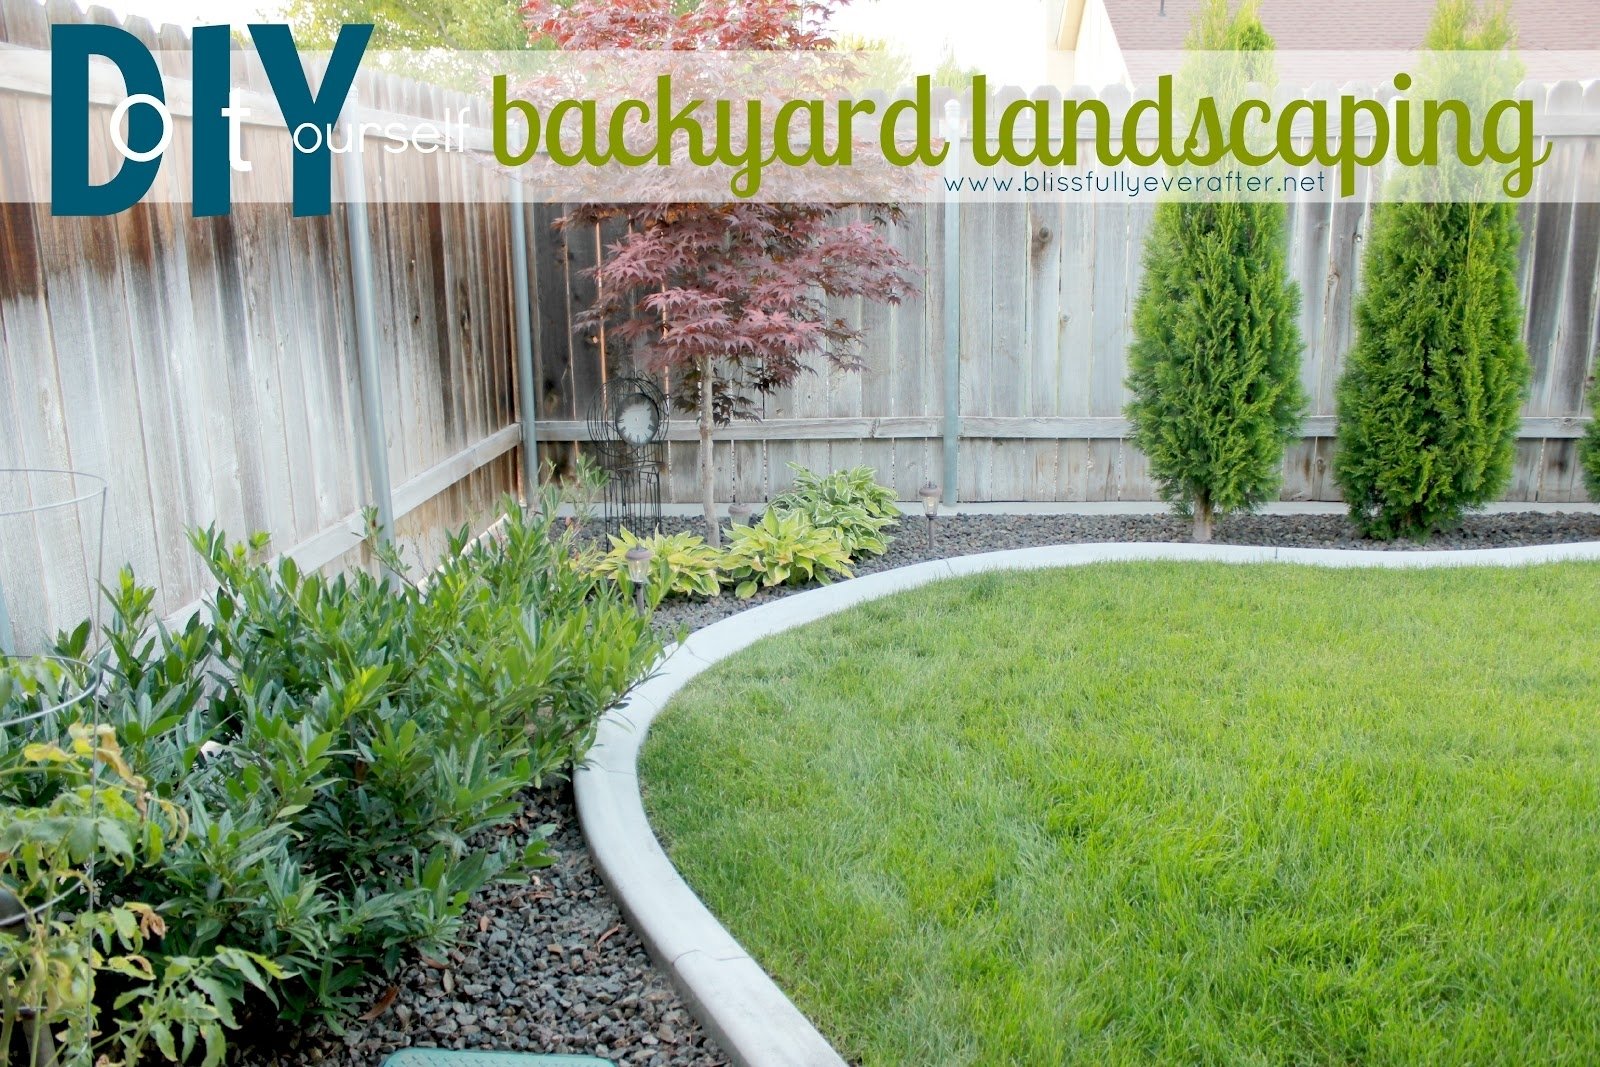 10 Fashionable Diy Landscaping Ideas On A Budget appealing diy front yard landscaping on a budget pics inspiration 2022